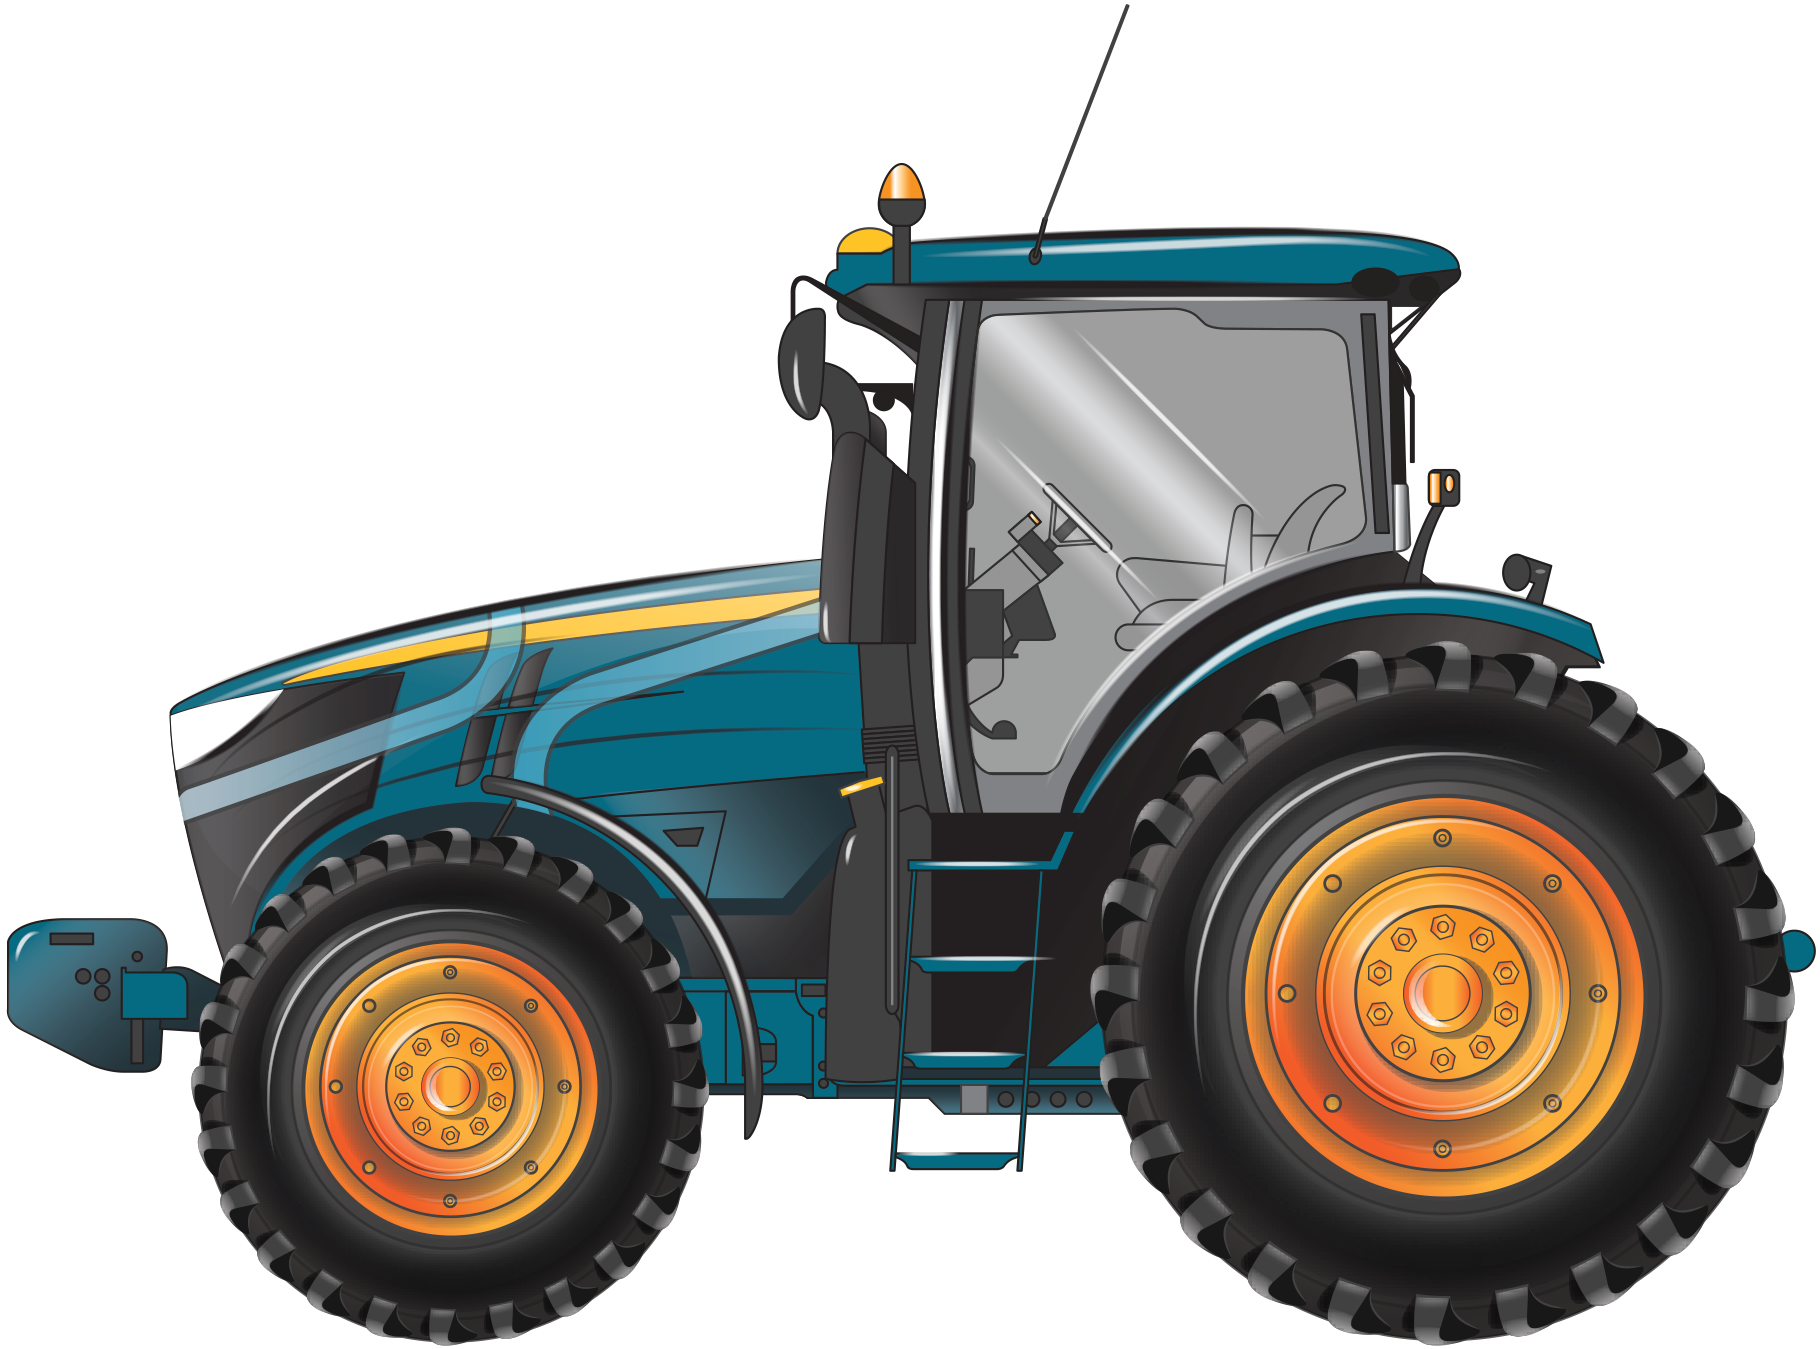 Image is of a tractor